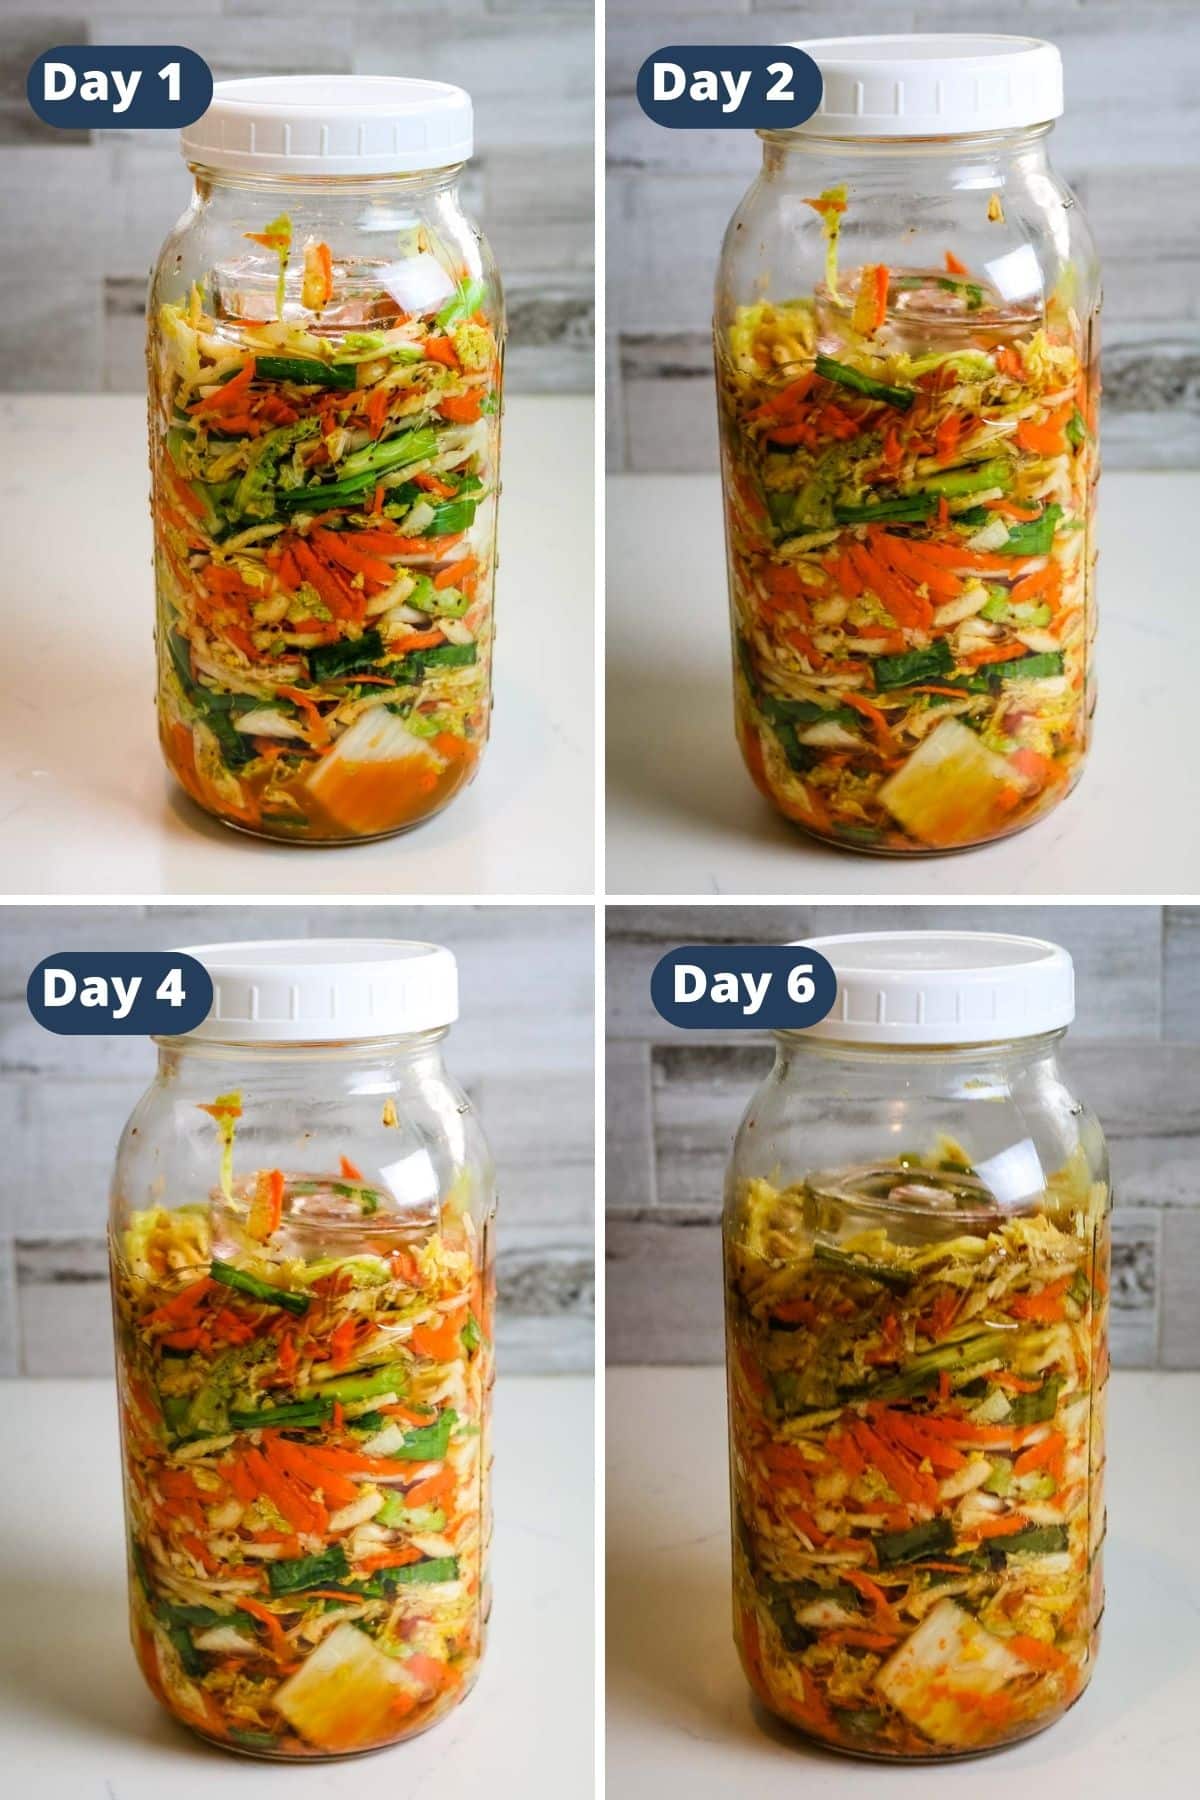 kimchi fermentation timeline with 4 different images of kimchi transforming into a fermented food.